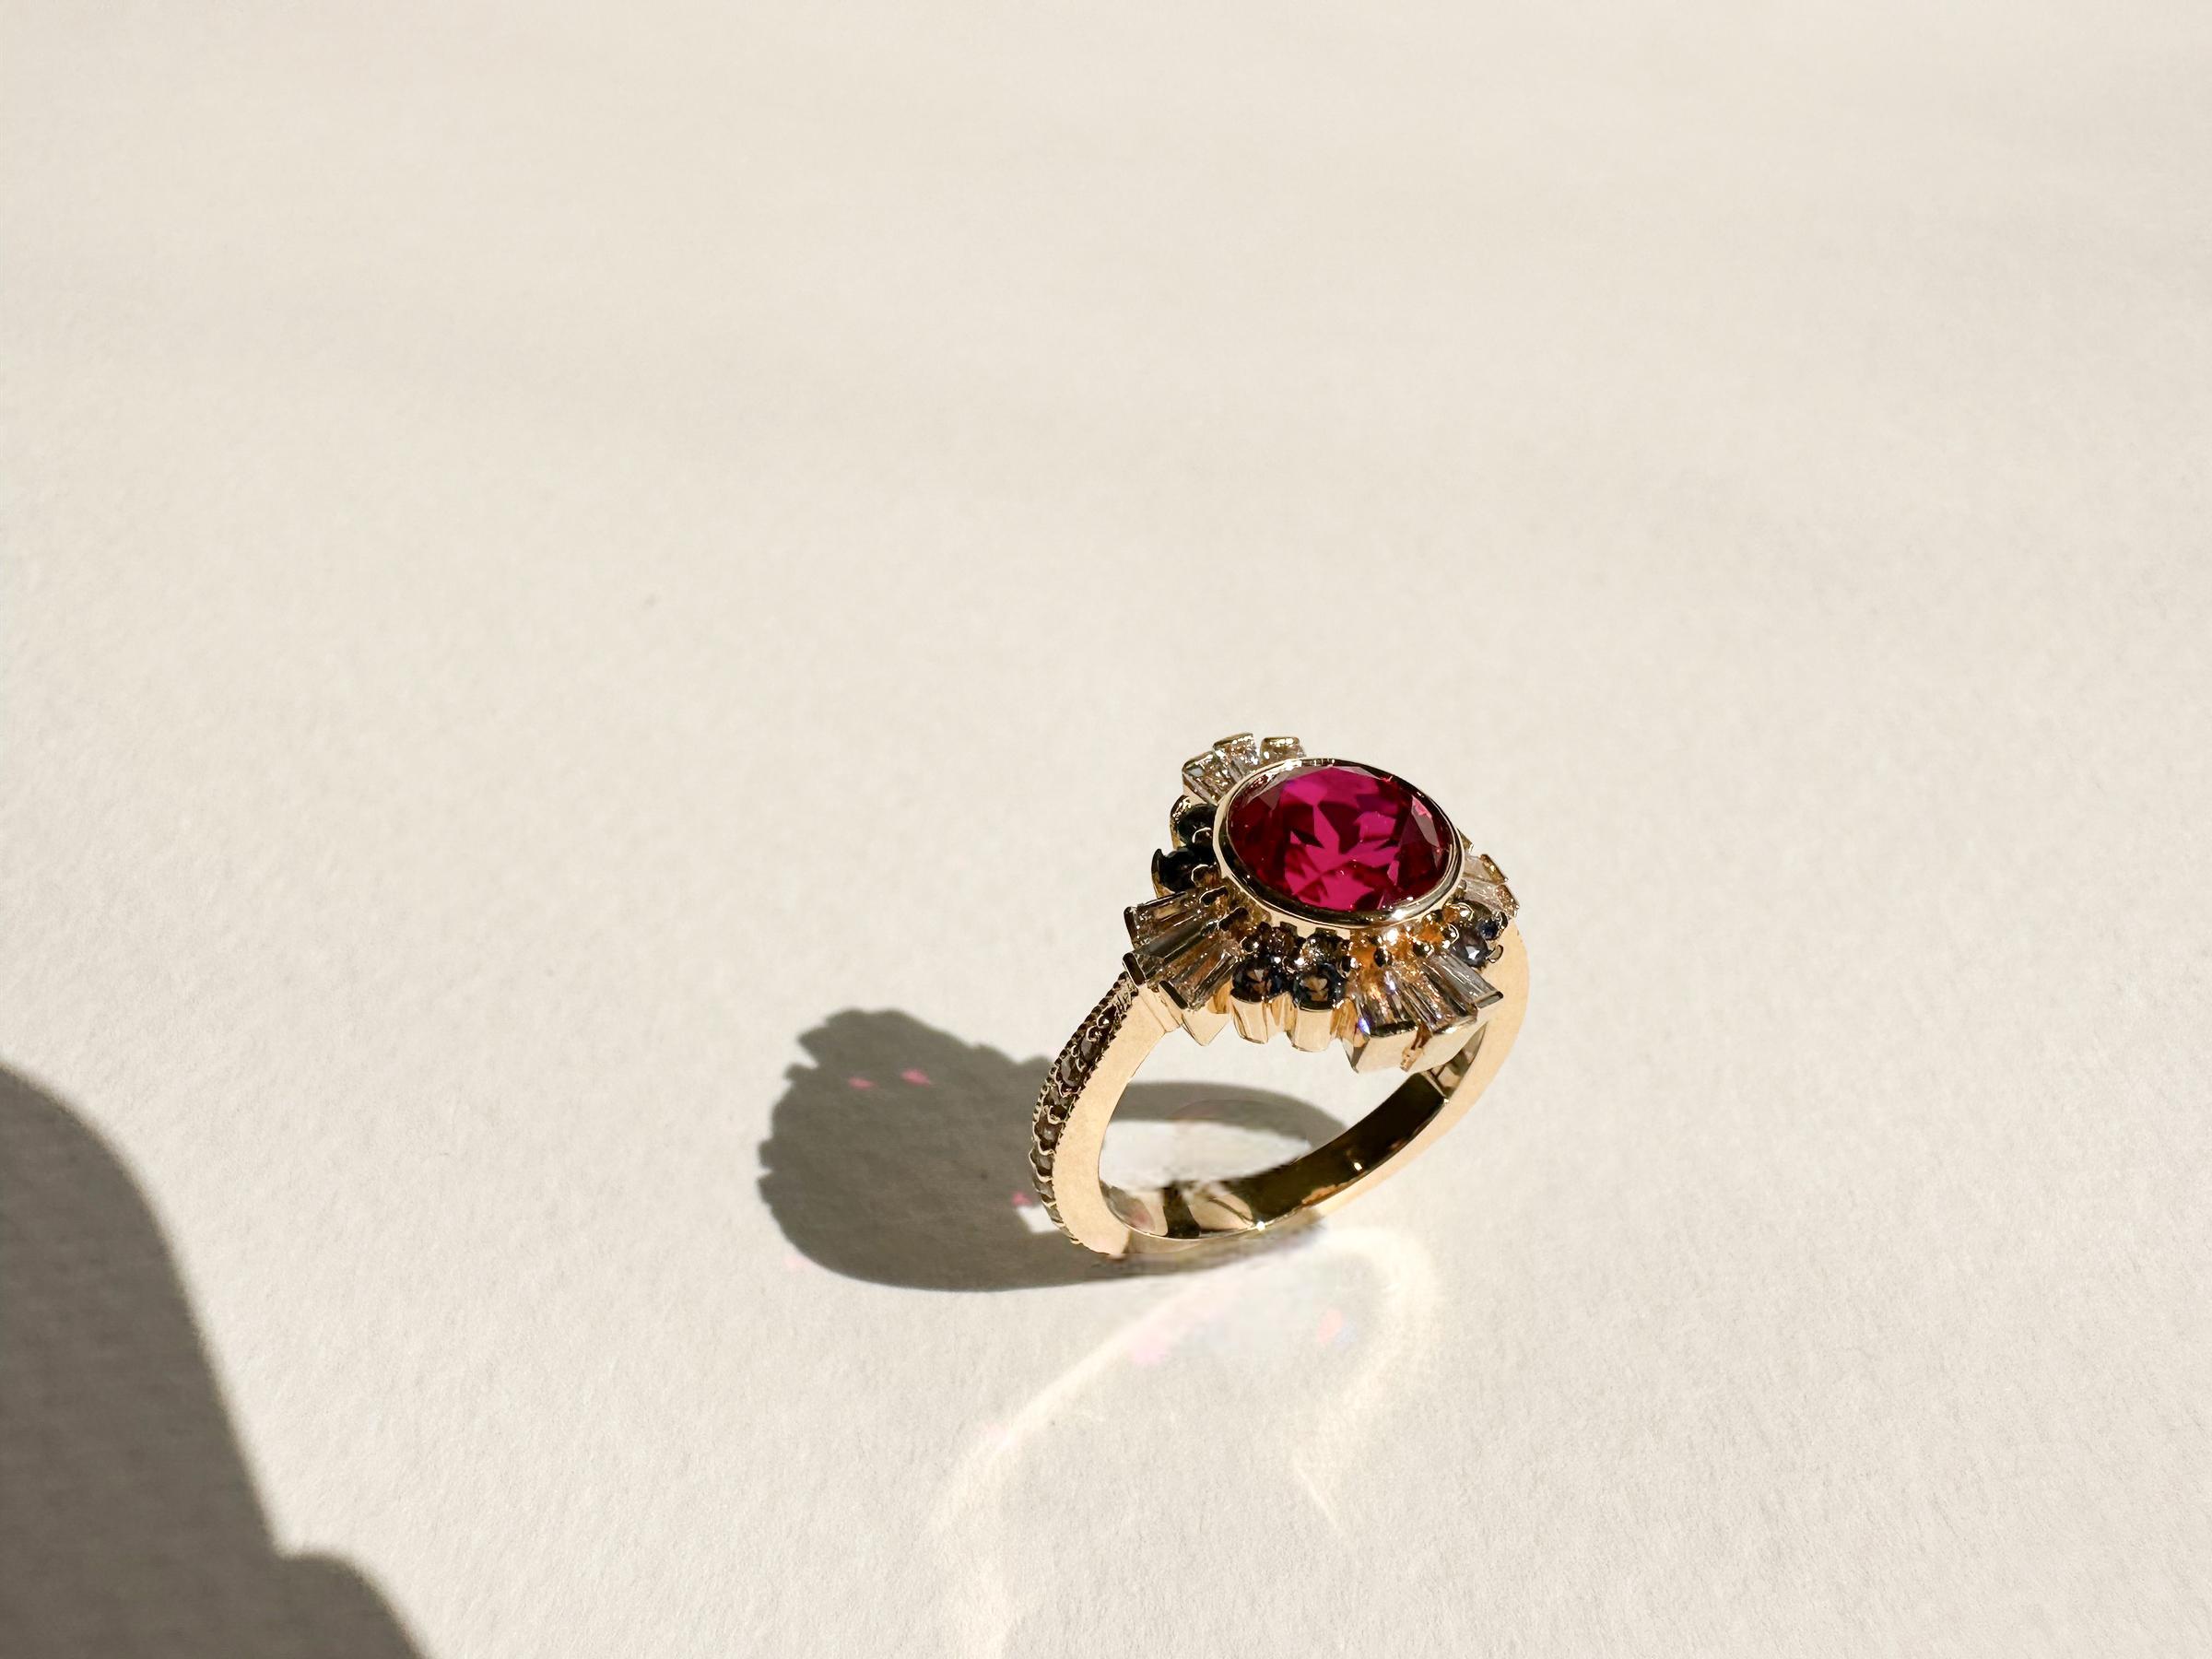 Round ruby featuring accenting stones in 14K yellow gold